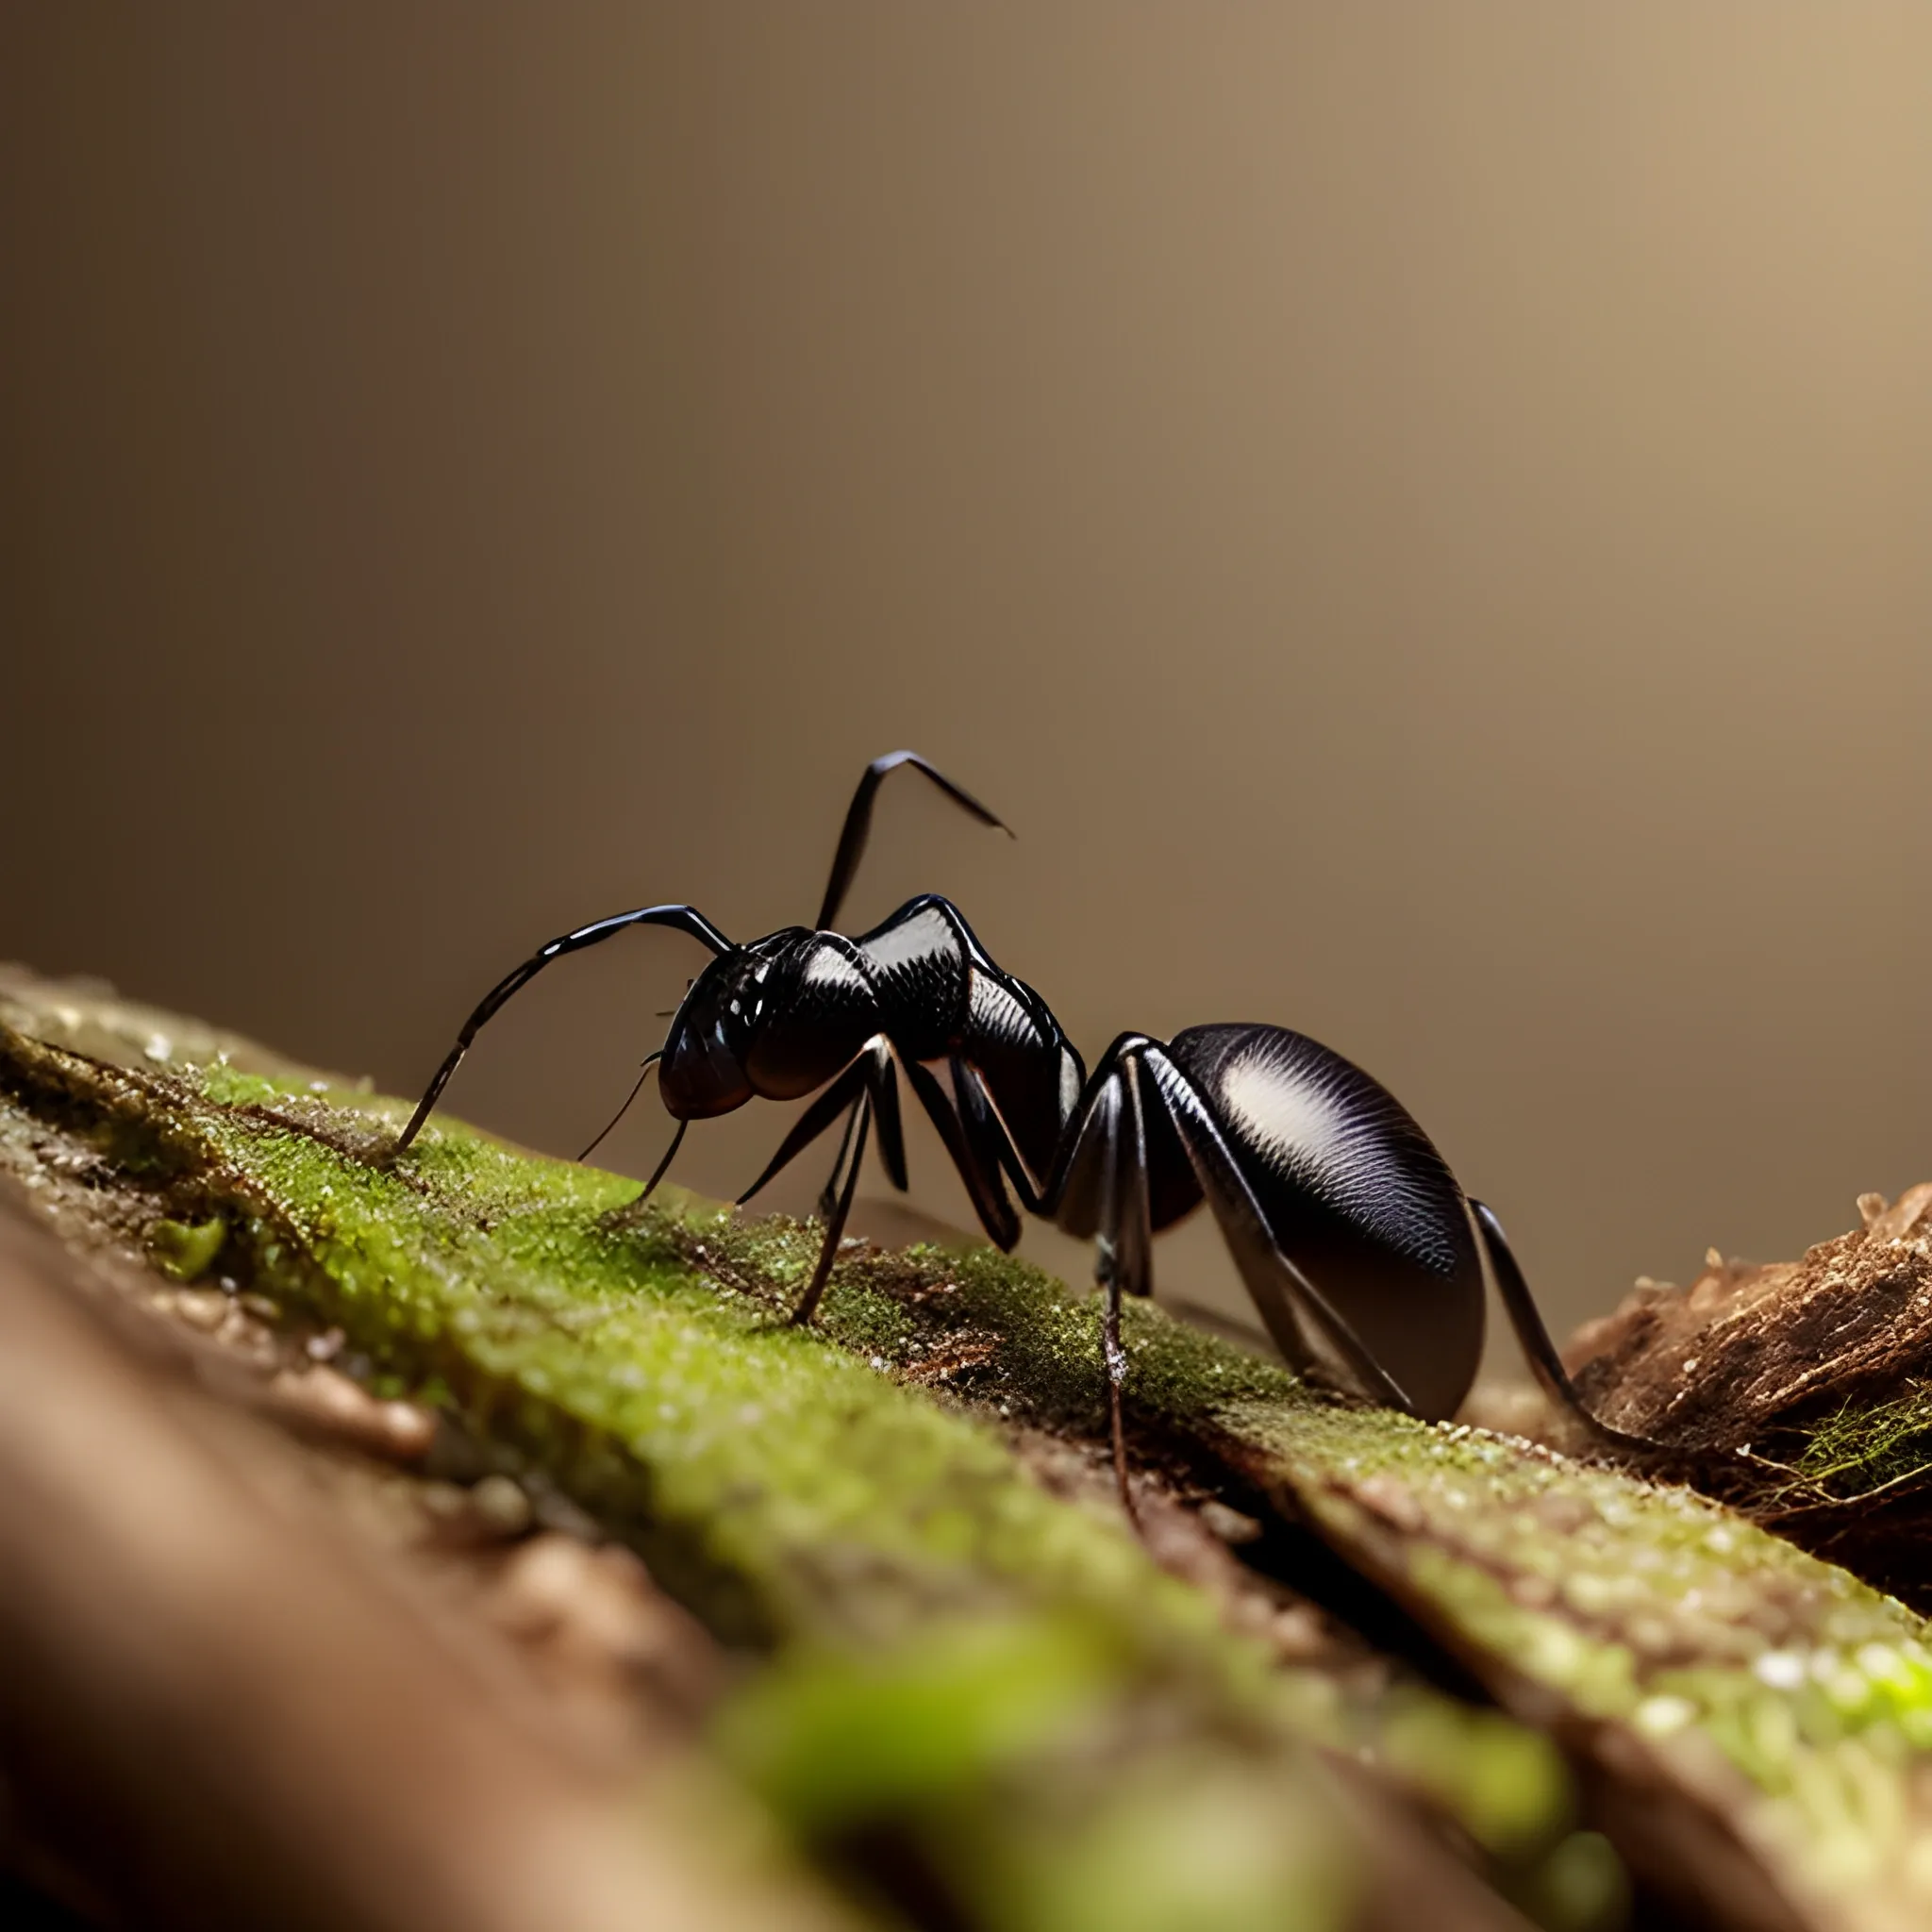 Make a picture of an ant lost in the forest, the picture must be the same in the real world,Wildlife,macro,taken by a professional photographer, with perfect detail and lighting,
